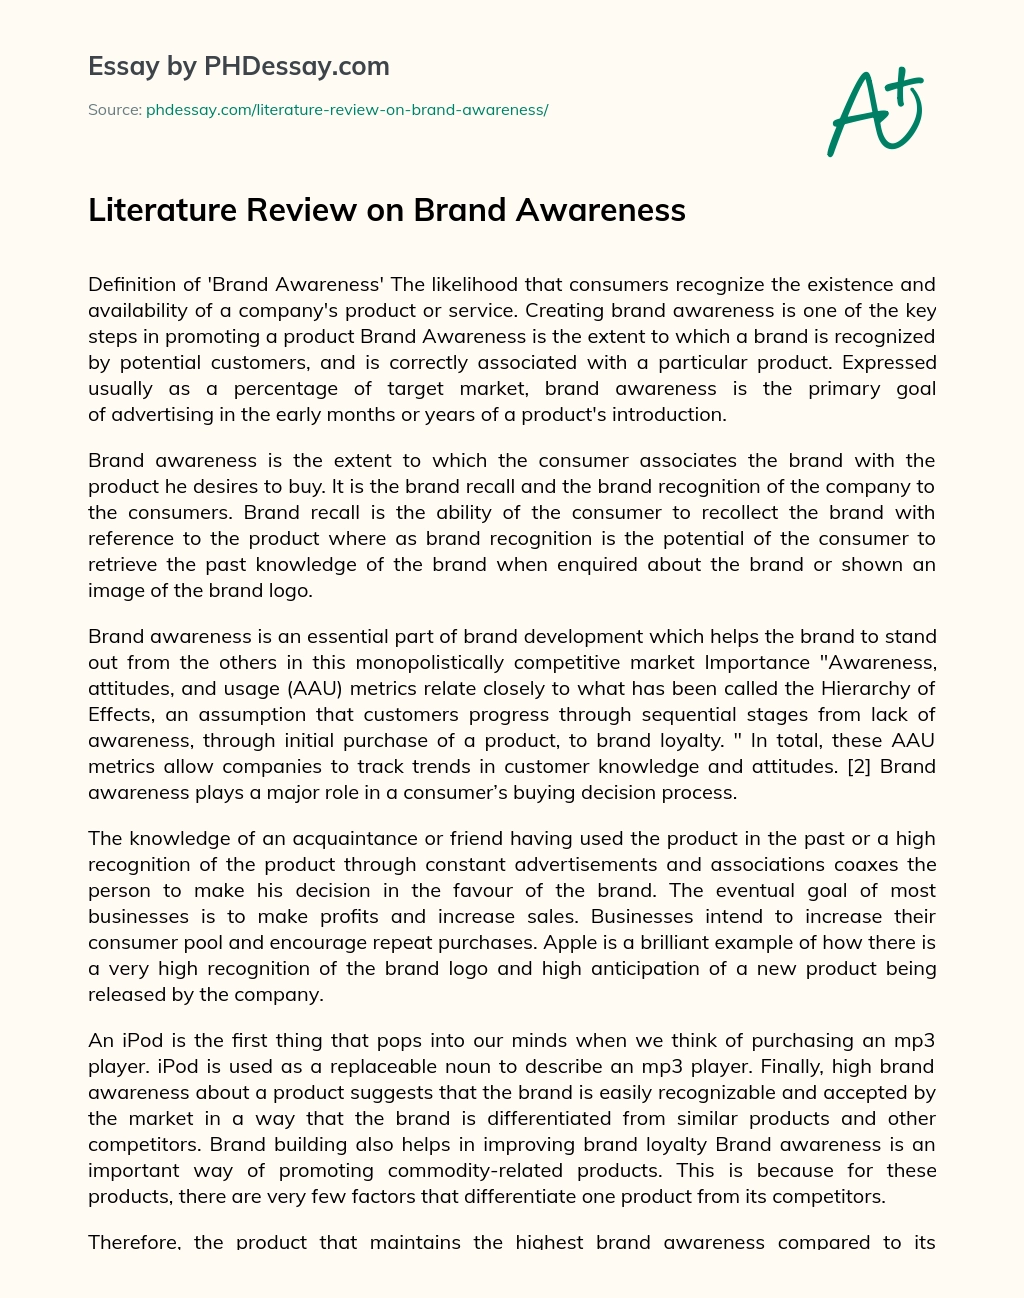 Literature Review on Brand Awareness essay